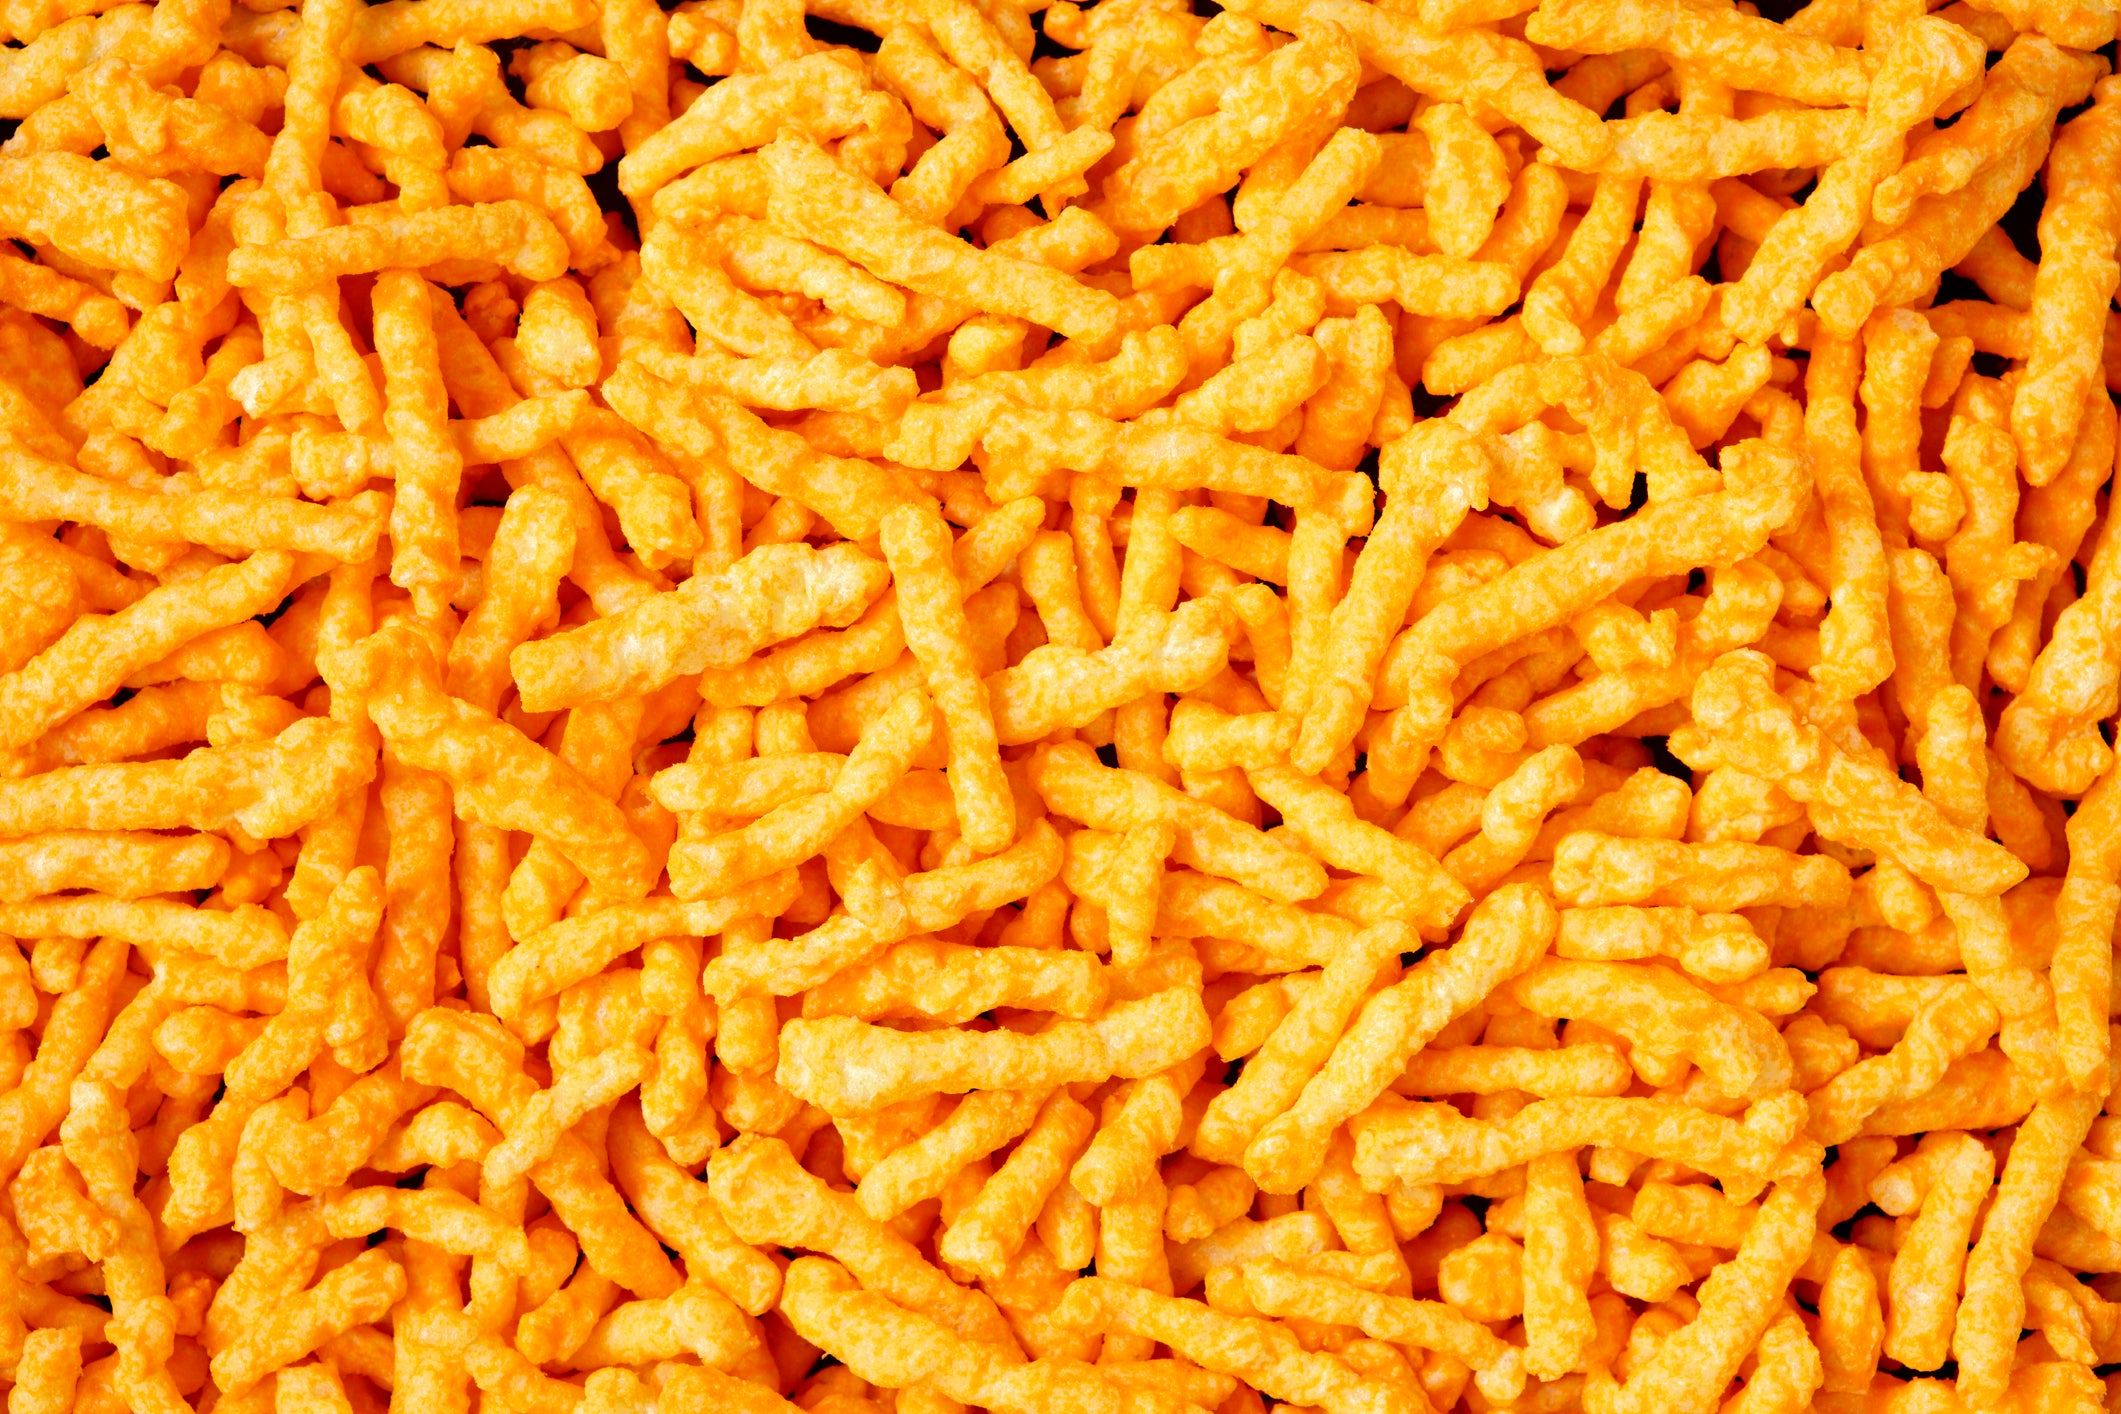 Six year old finds bullet in pack of Cheetos